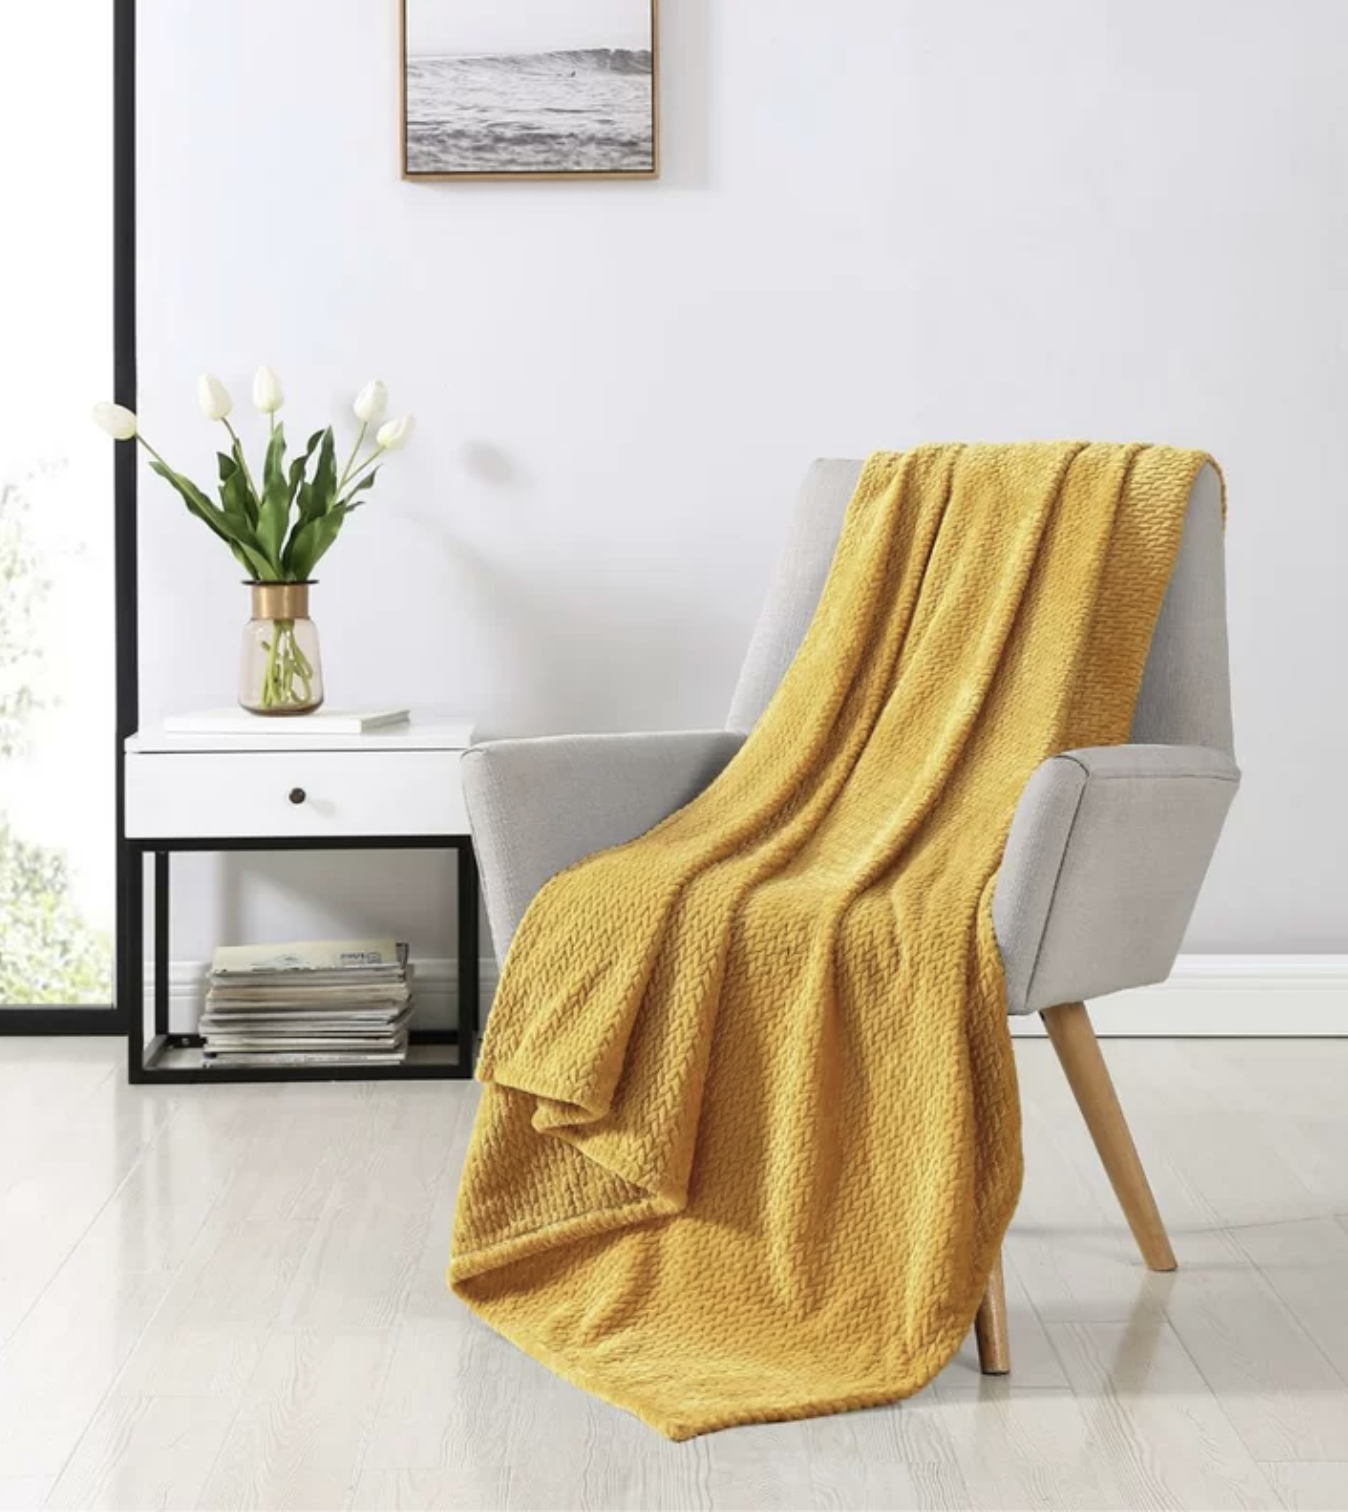 A gold throw blanket on a chair